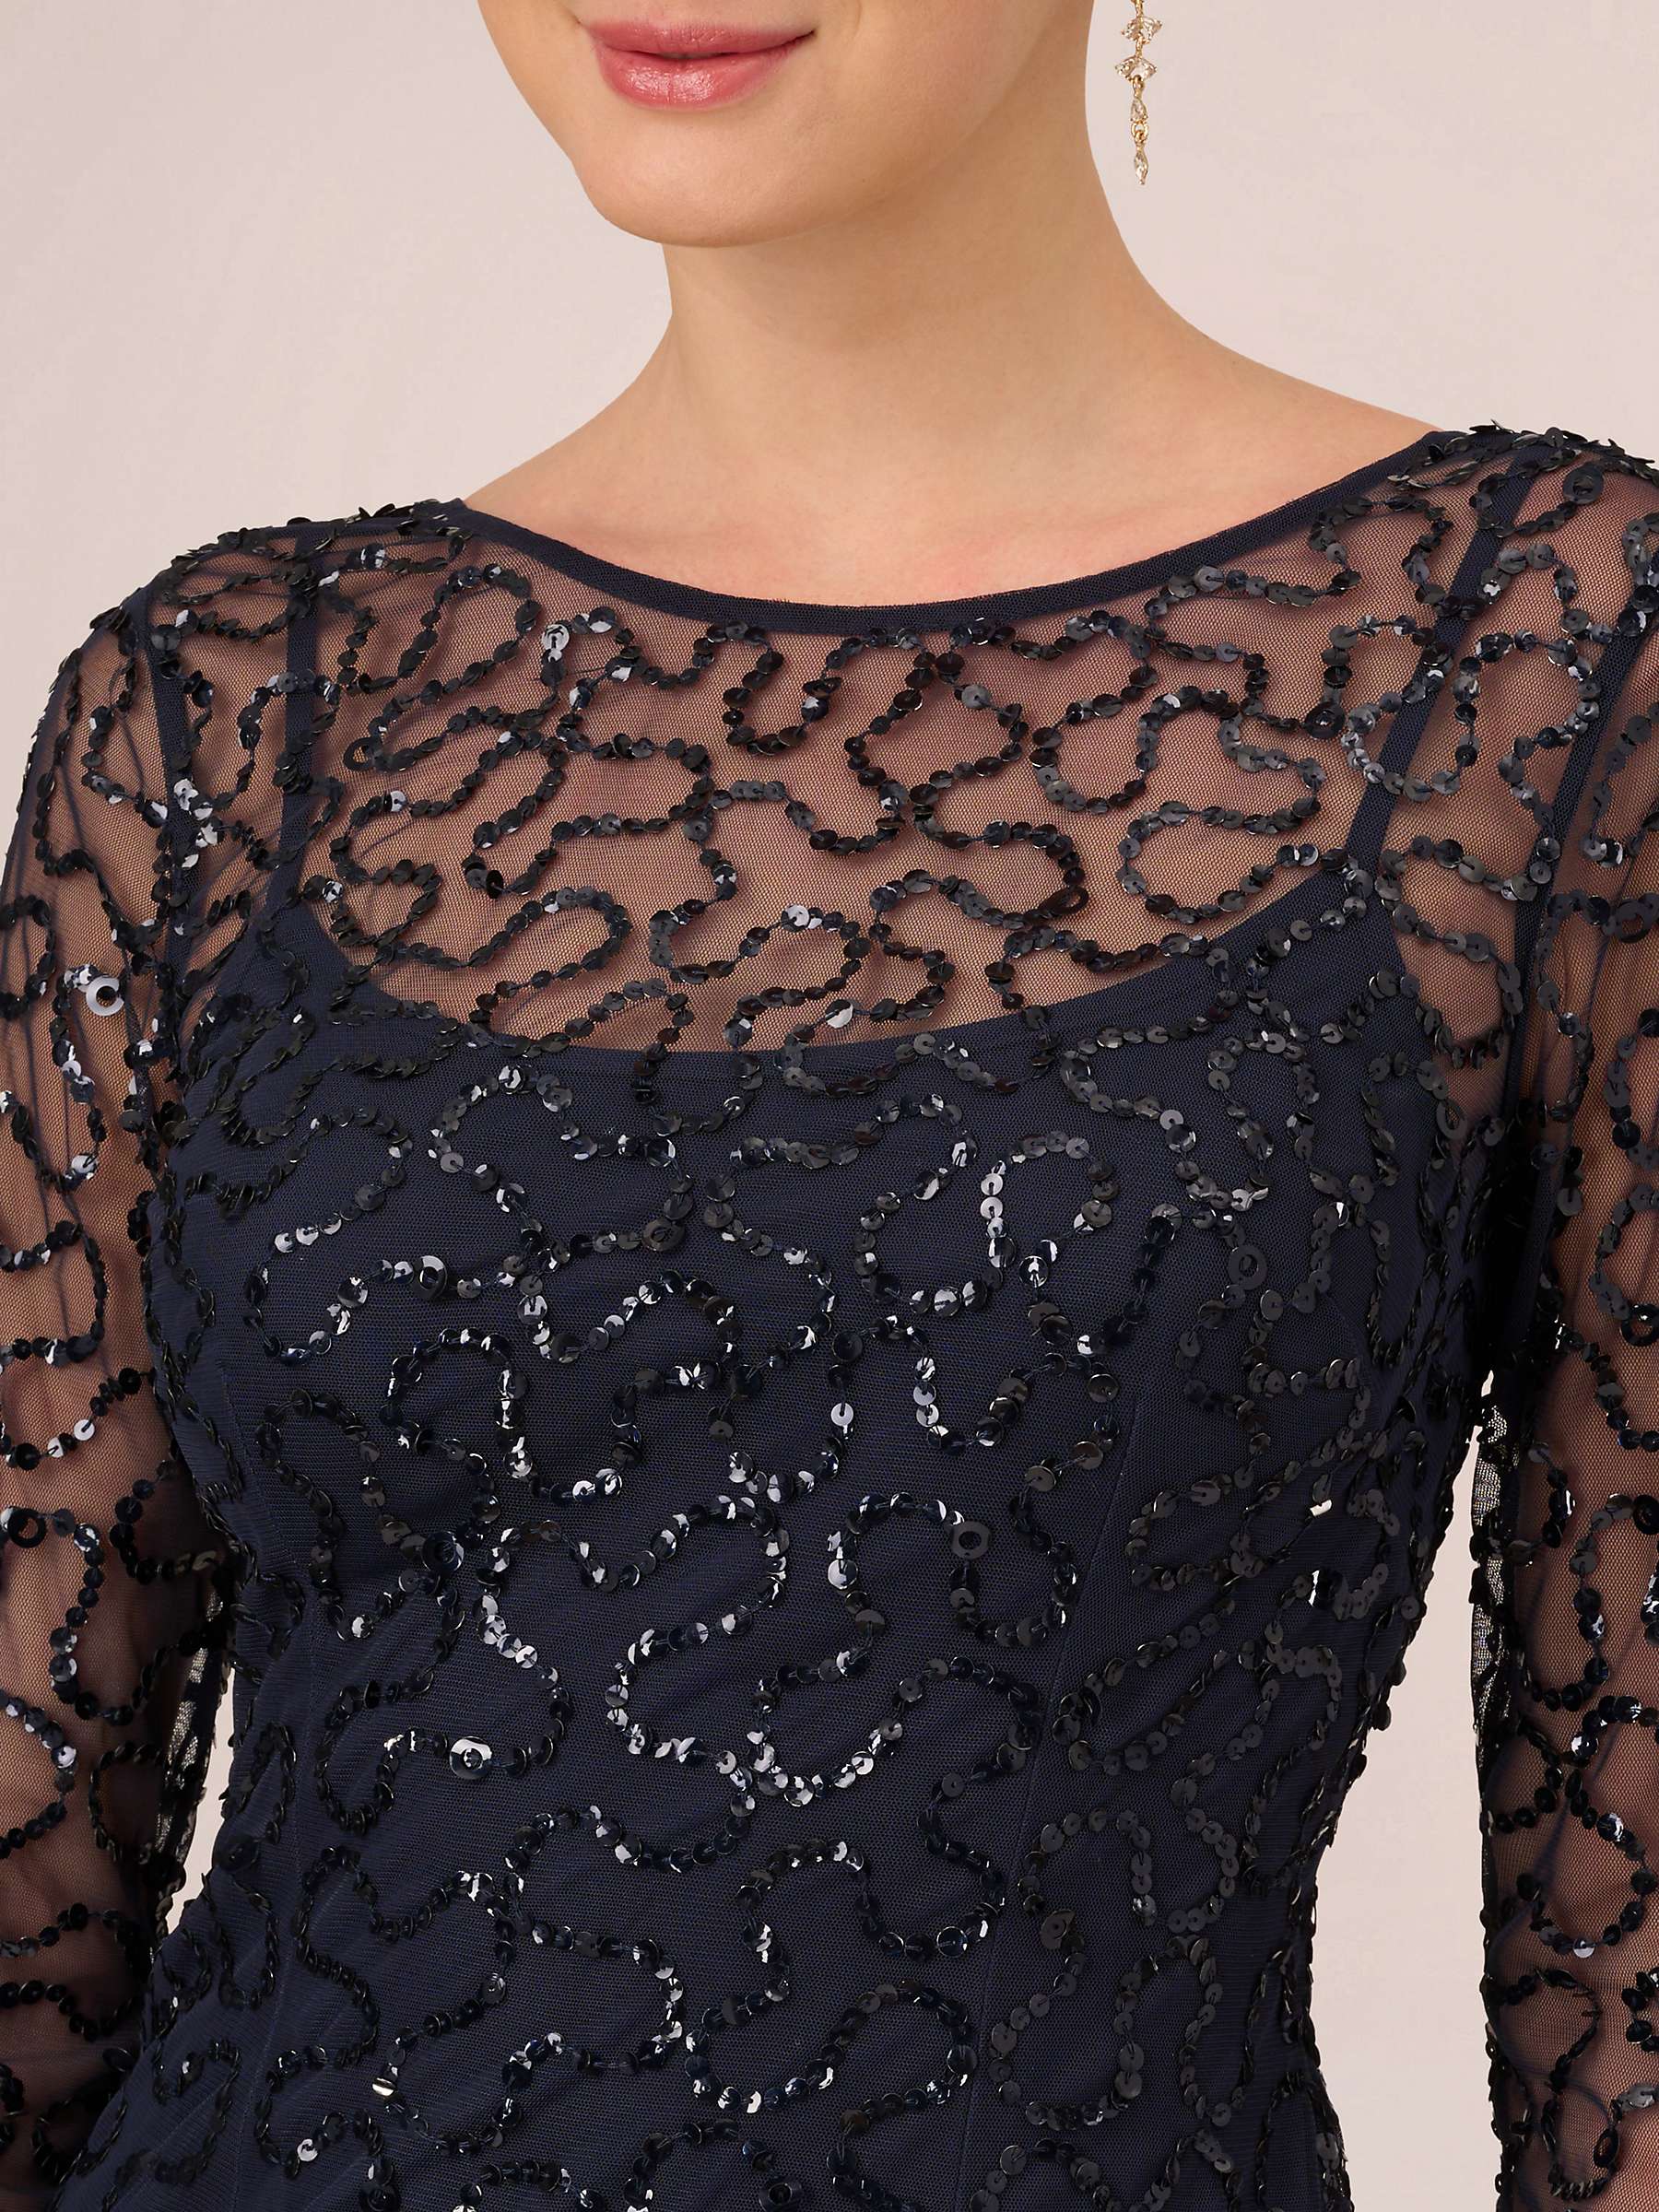 Buy Adrianna Papell Papell Studio Beaded Sheath Dress, Navy Online at johnlewis.com